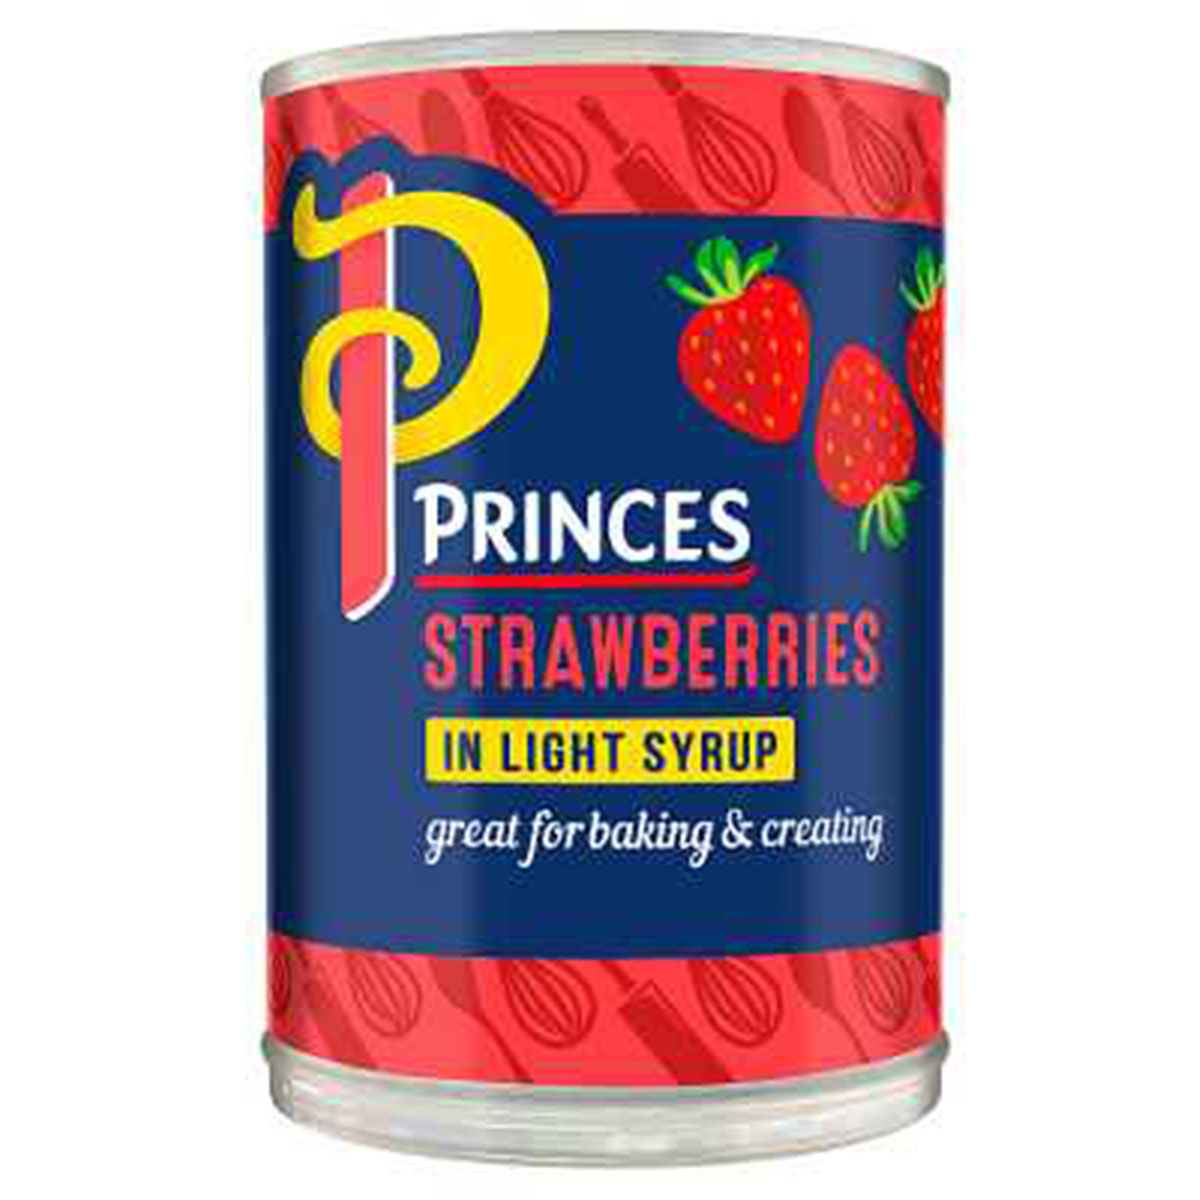 Princes - Strawberries in Light Syrup - 410g - Continental Food Store